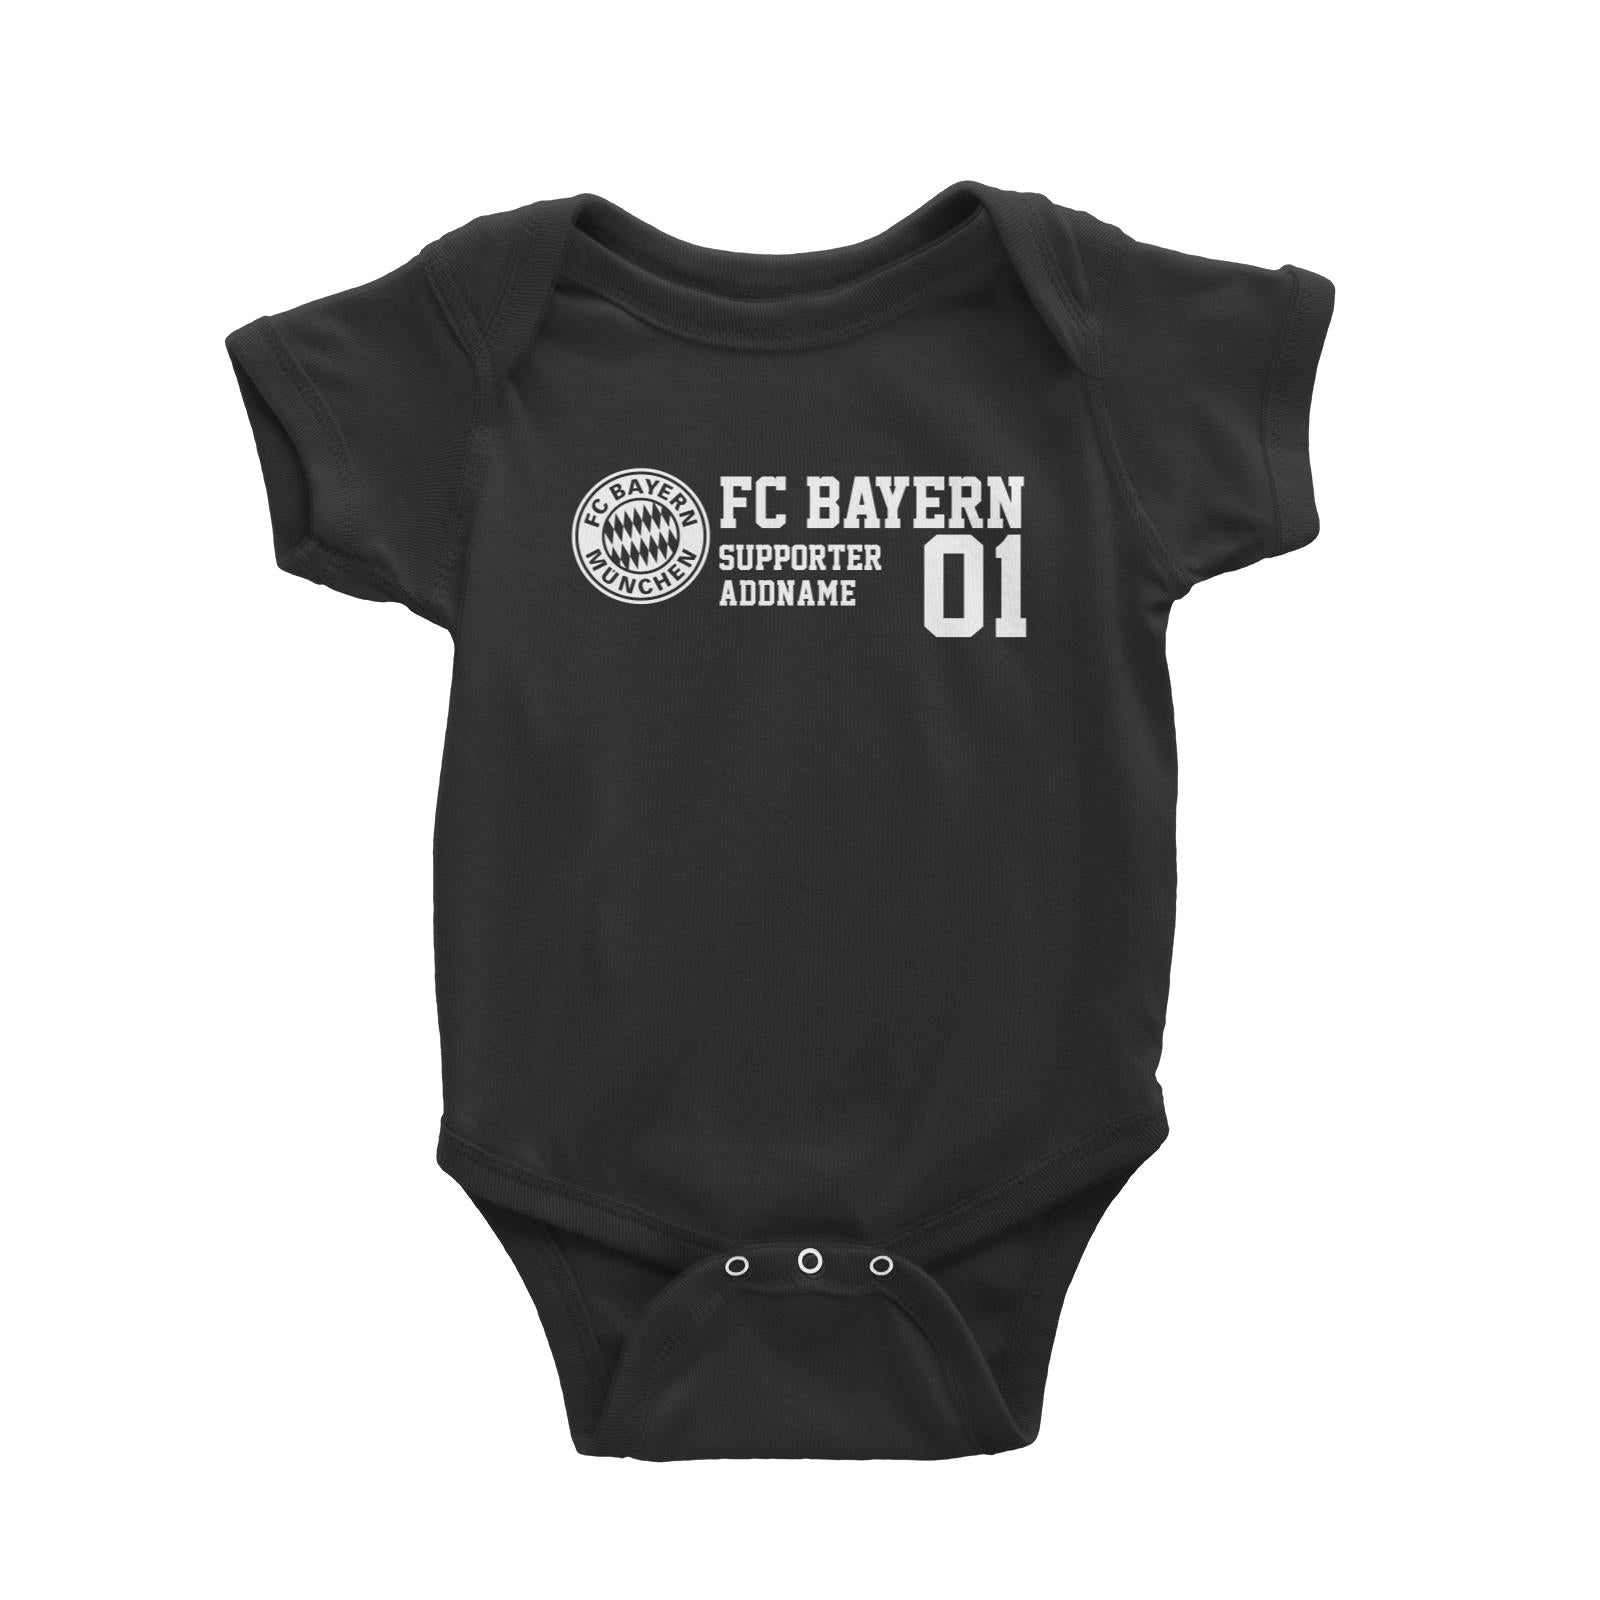 FC Bayern Football Supporter Addname Baby Romper